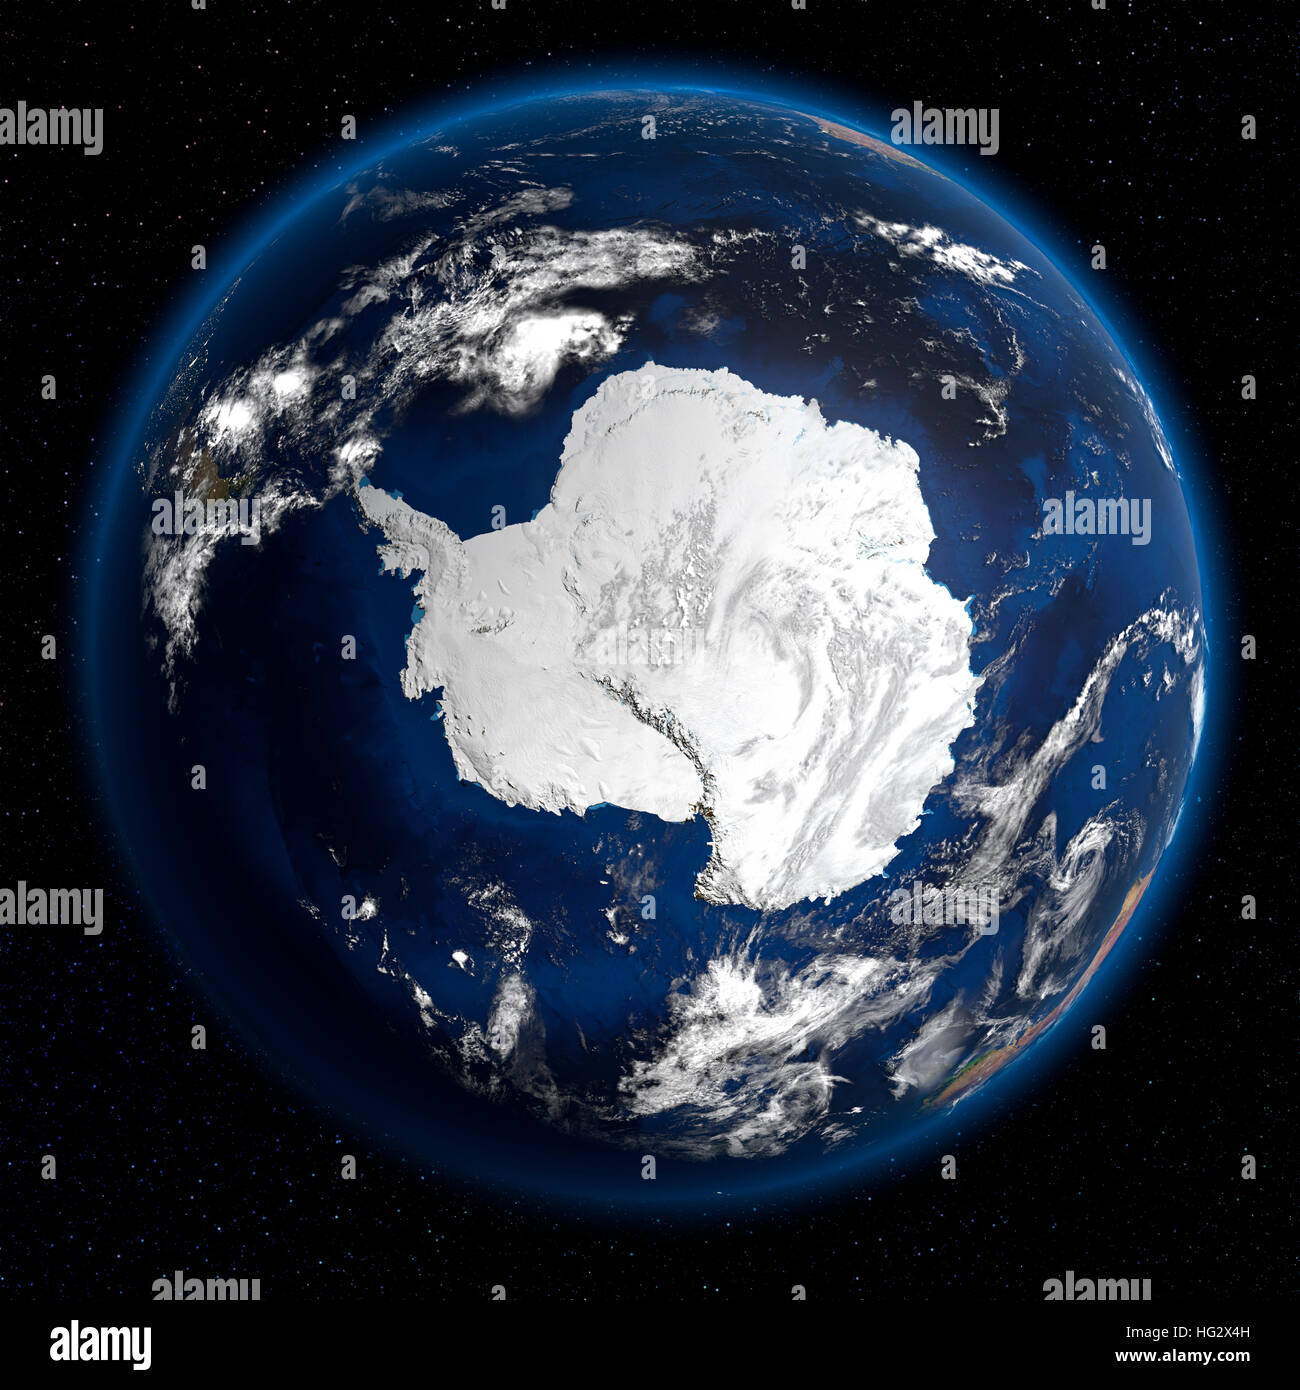 Earth viewed from space showing Antarctica. Realistic digital illustration including relief map hill shading of terrain. Please credit Nasa. Stock Photo